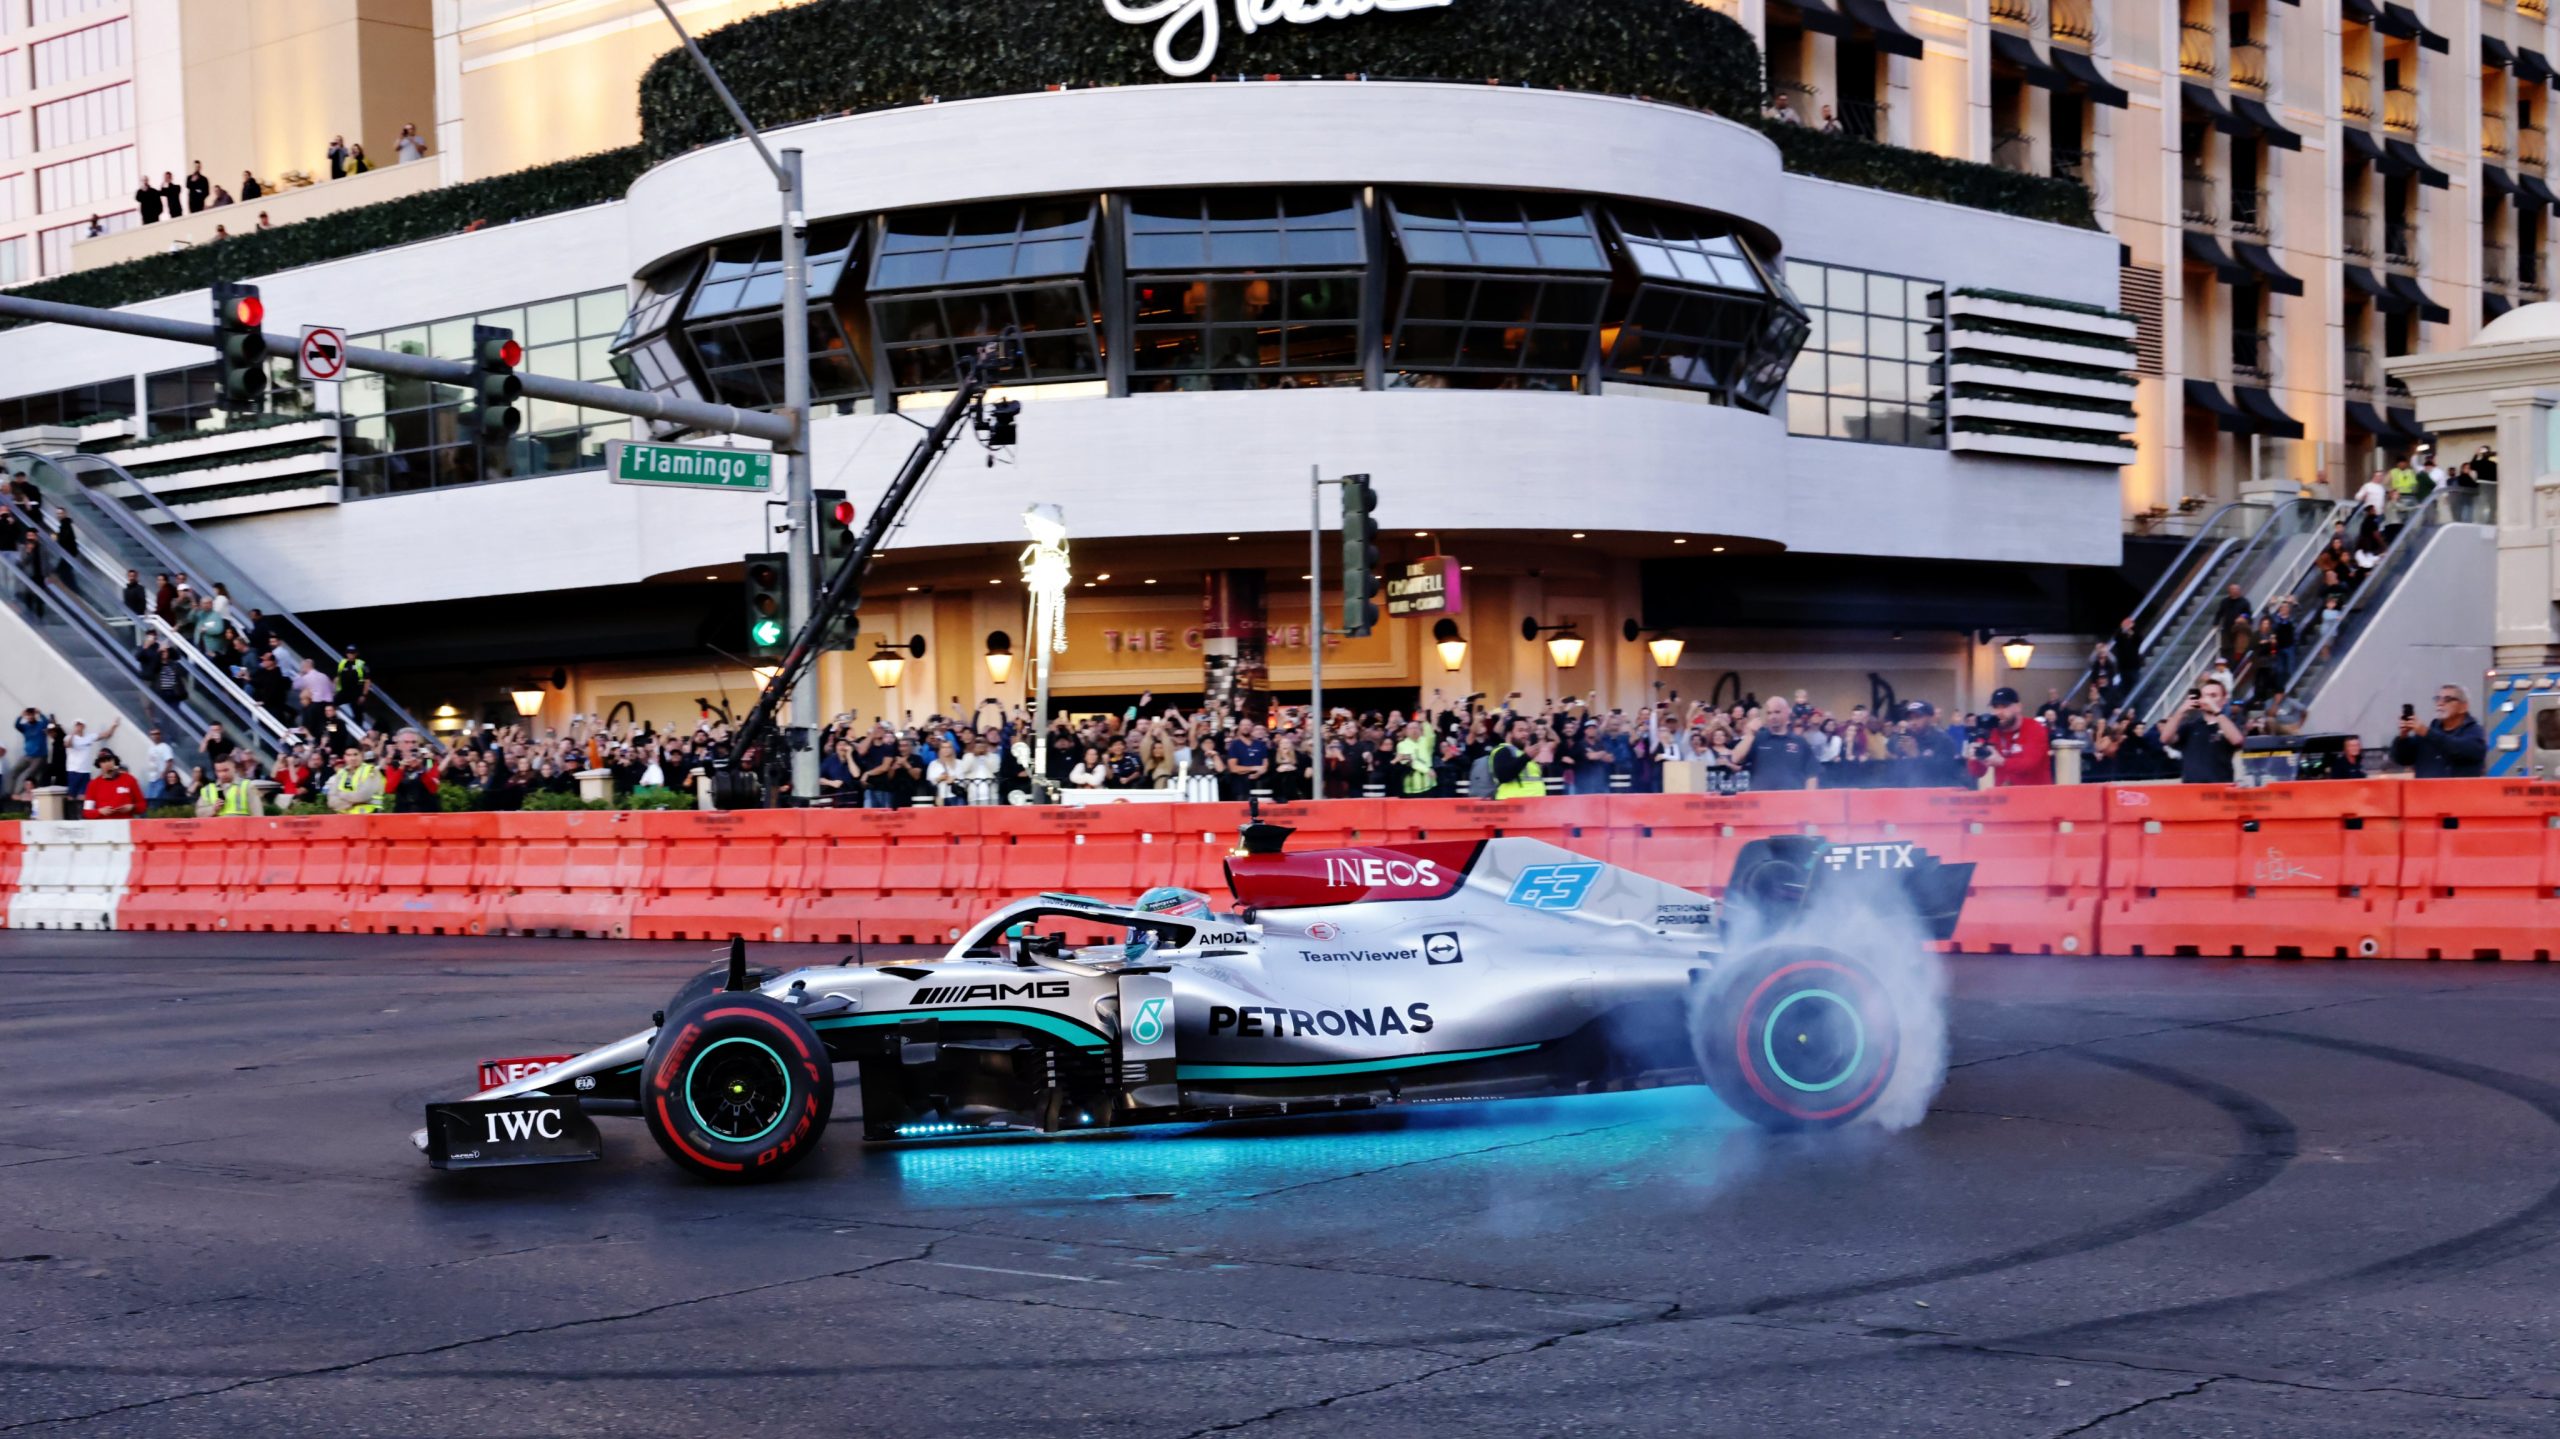 F1 hits the jackpot with Vegas GP launch party